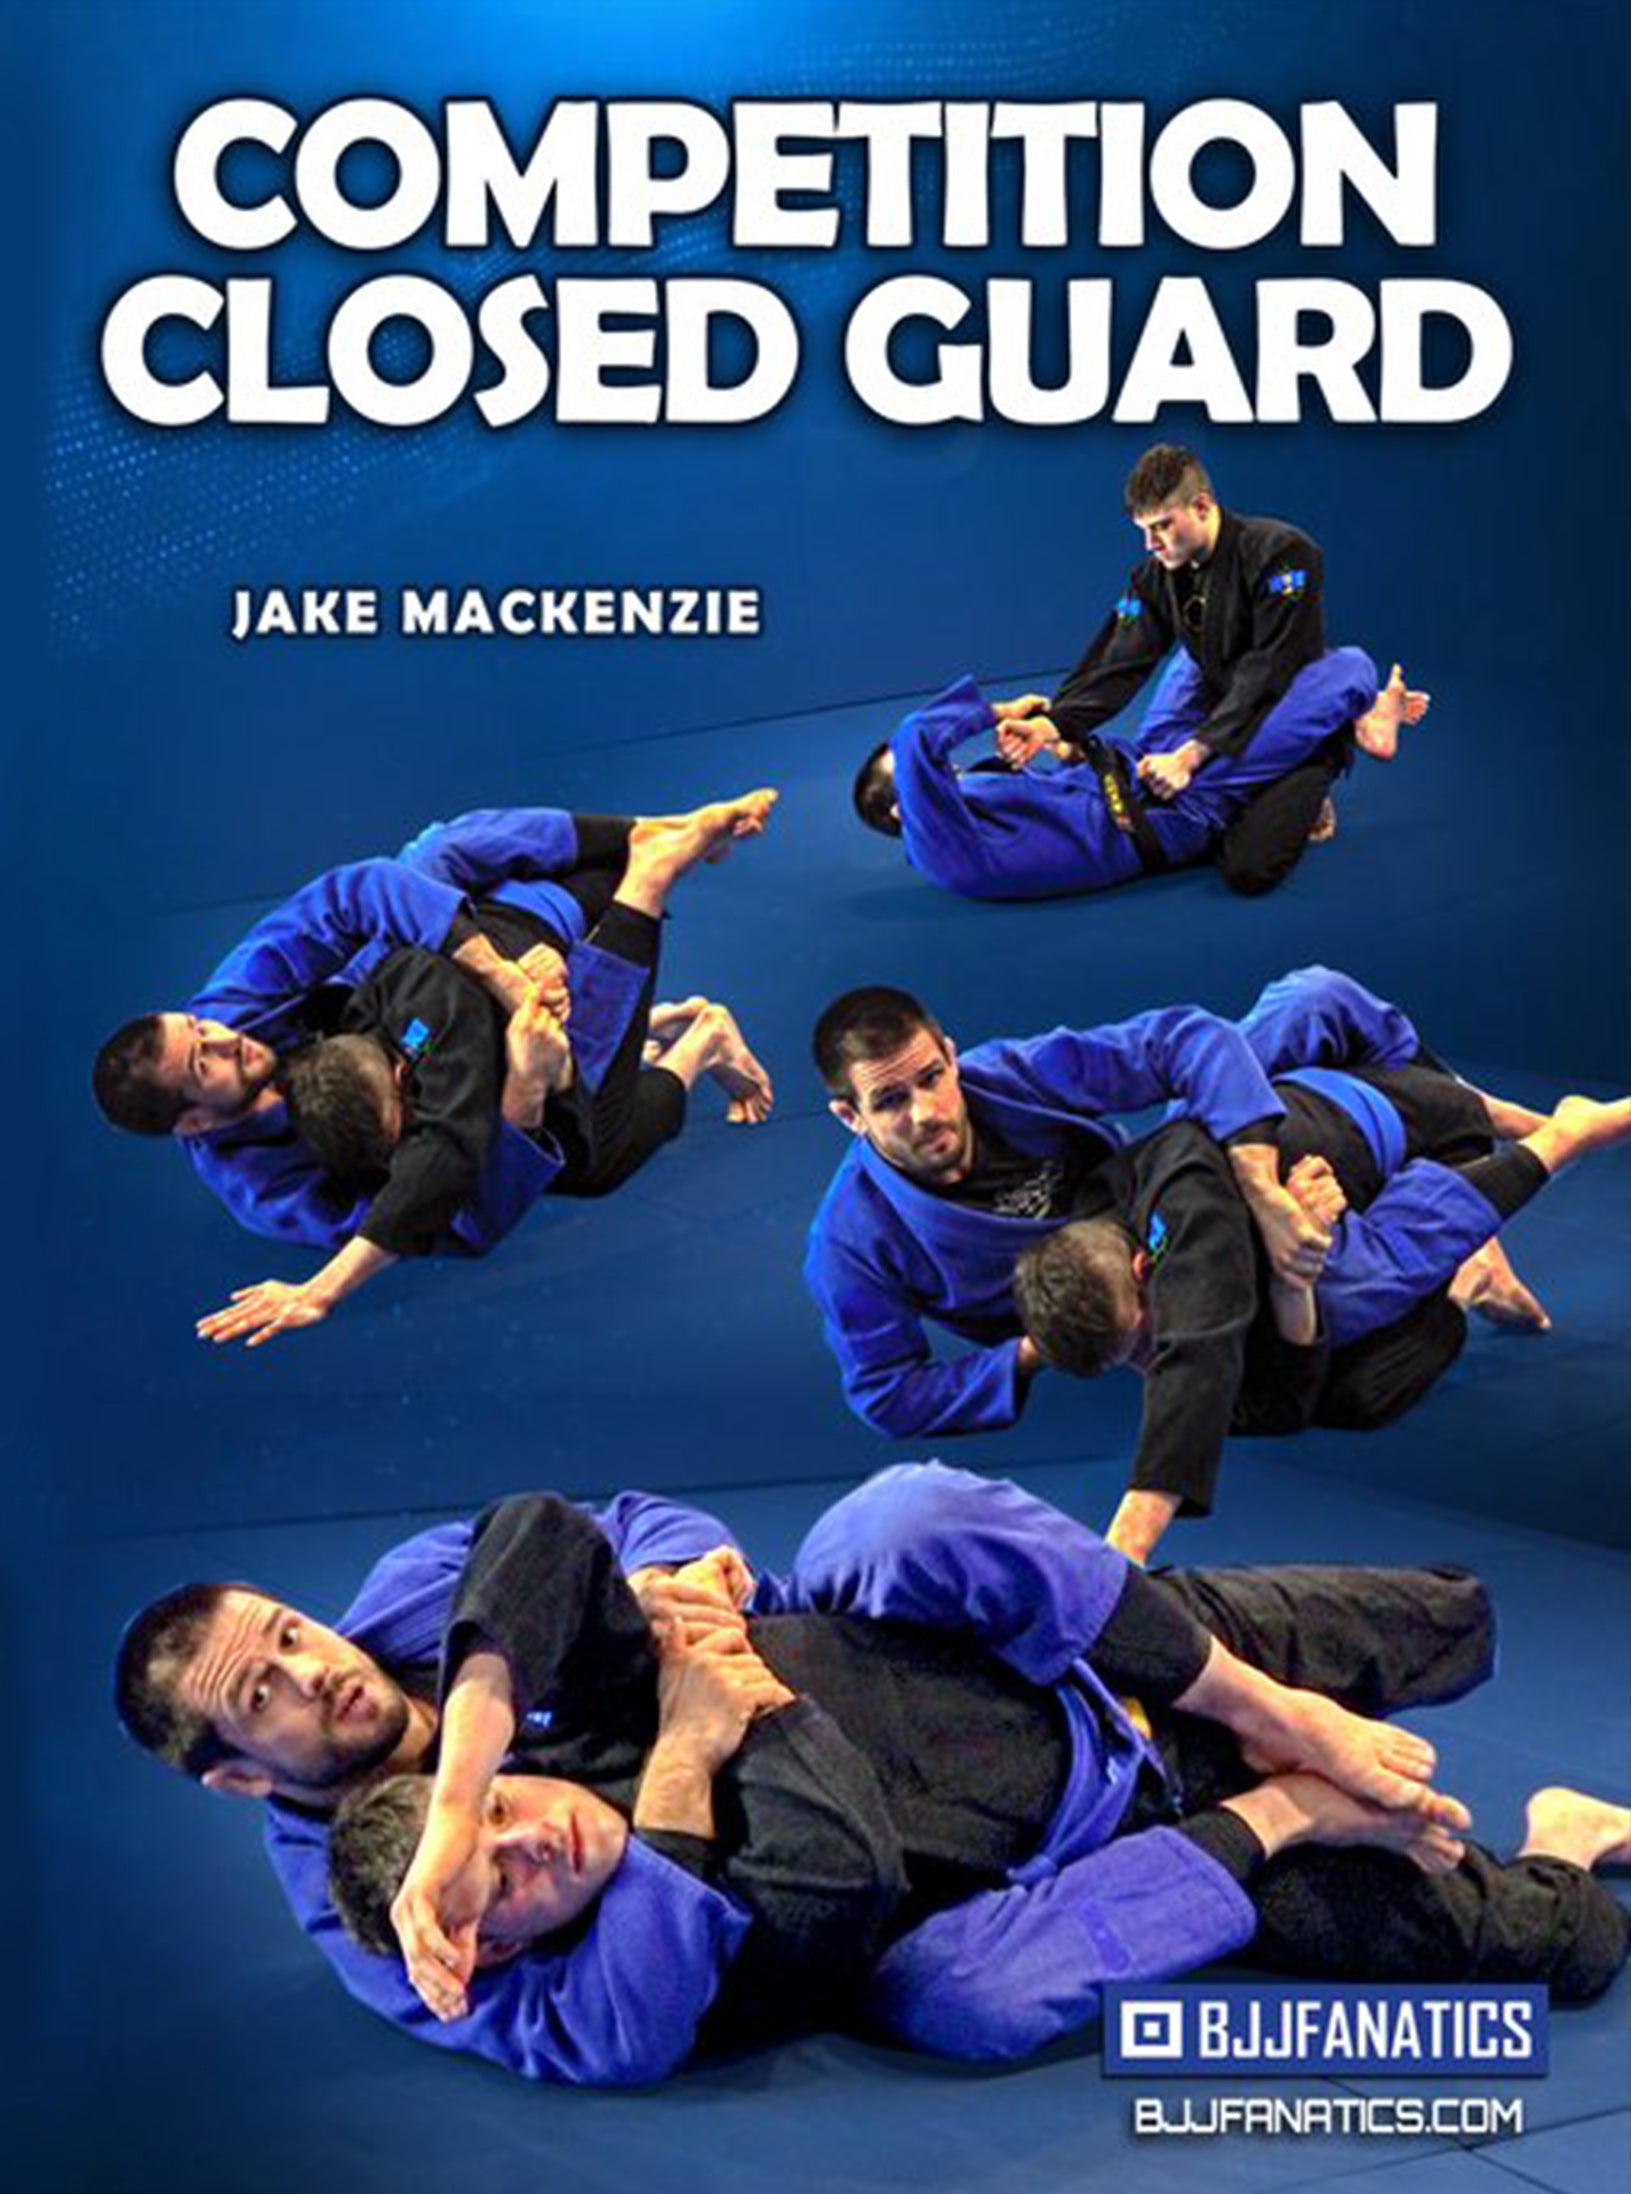 Closed Guard Fundamentals - What to do in Closed Guard (Bottom Position)  for beginners - BJJBudddy